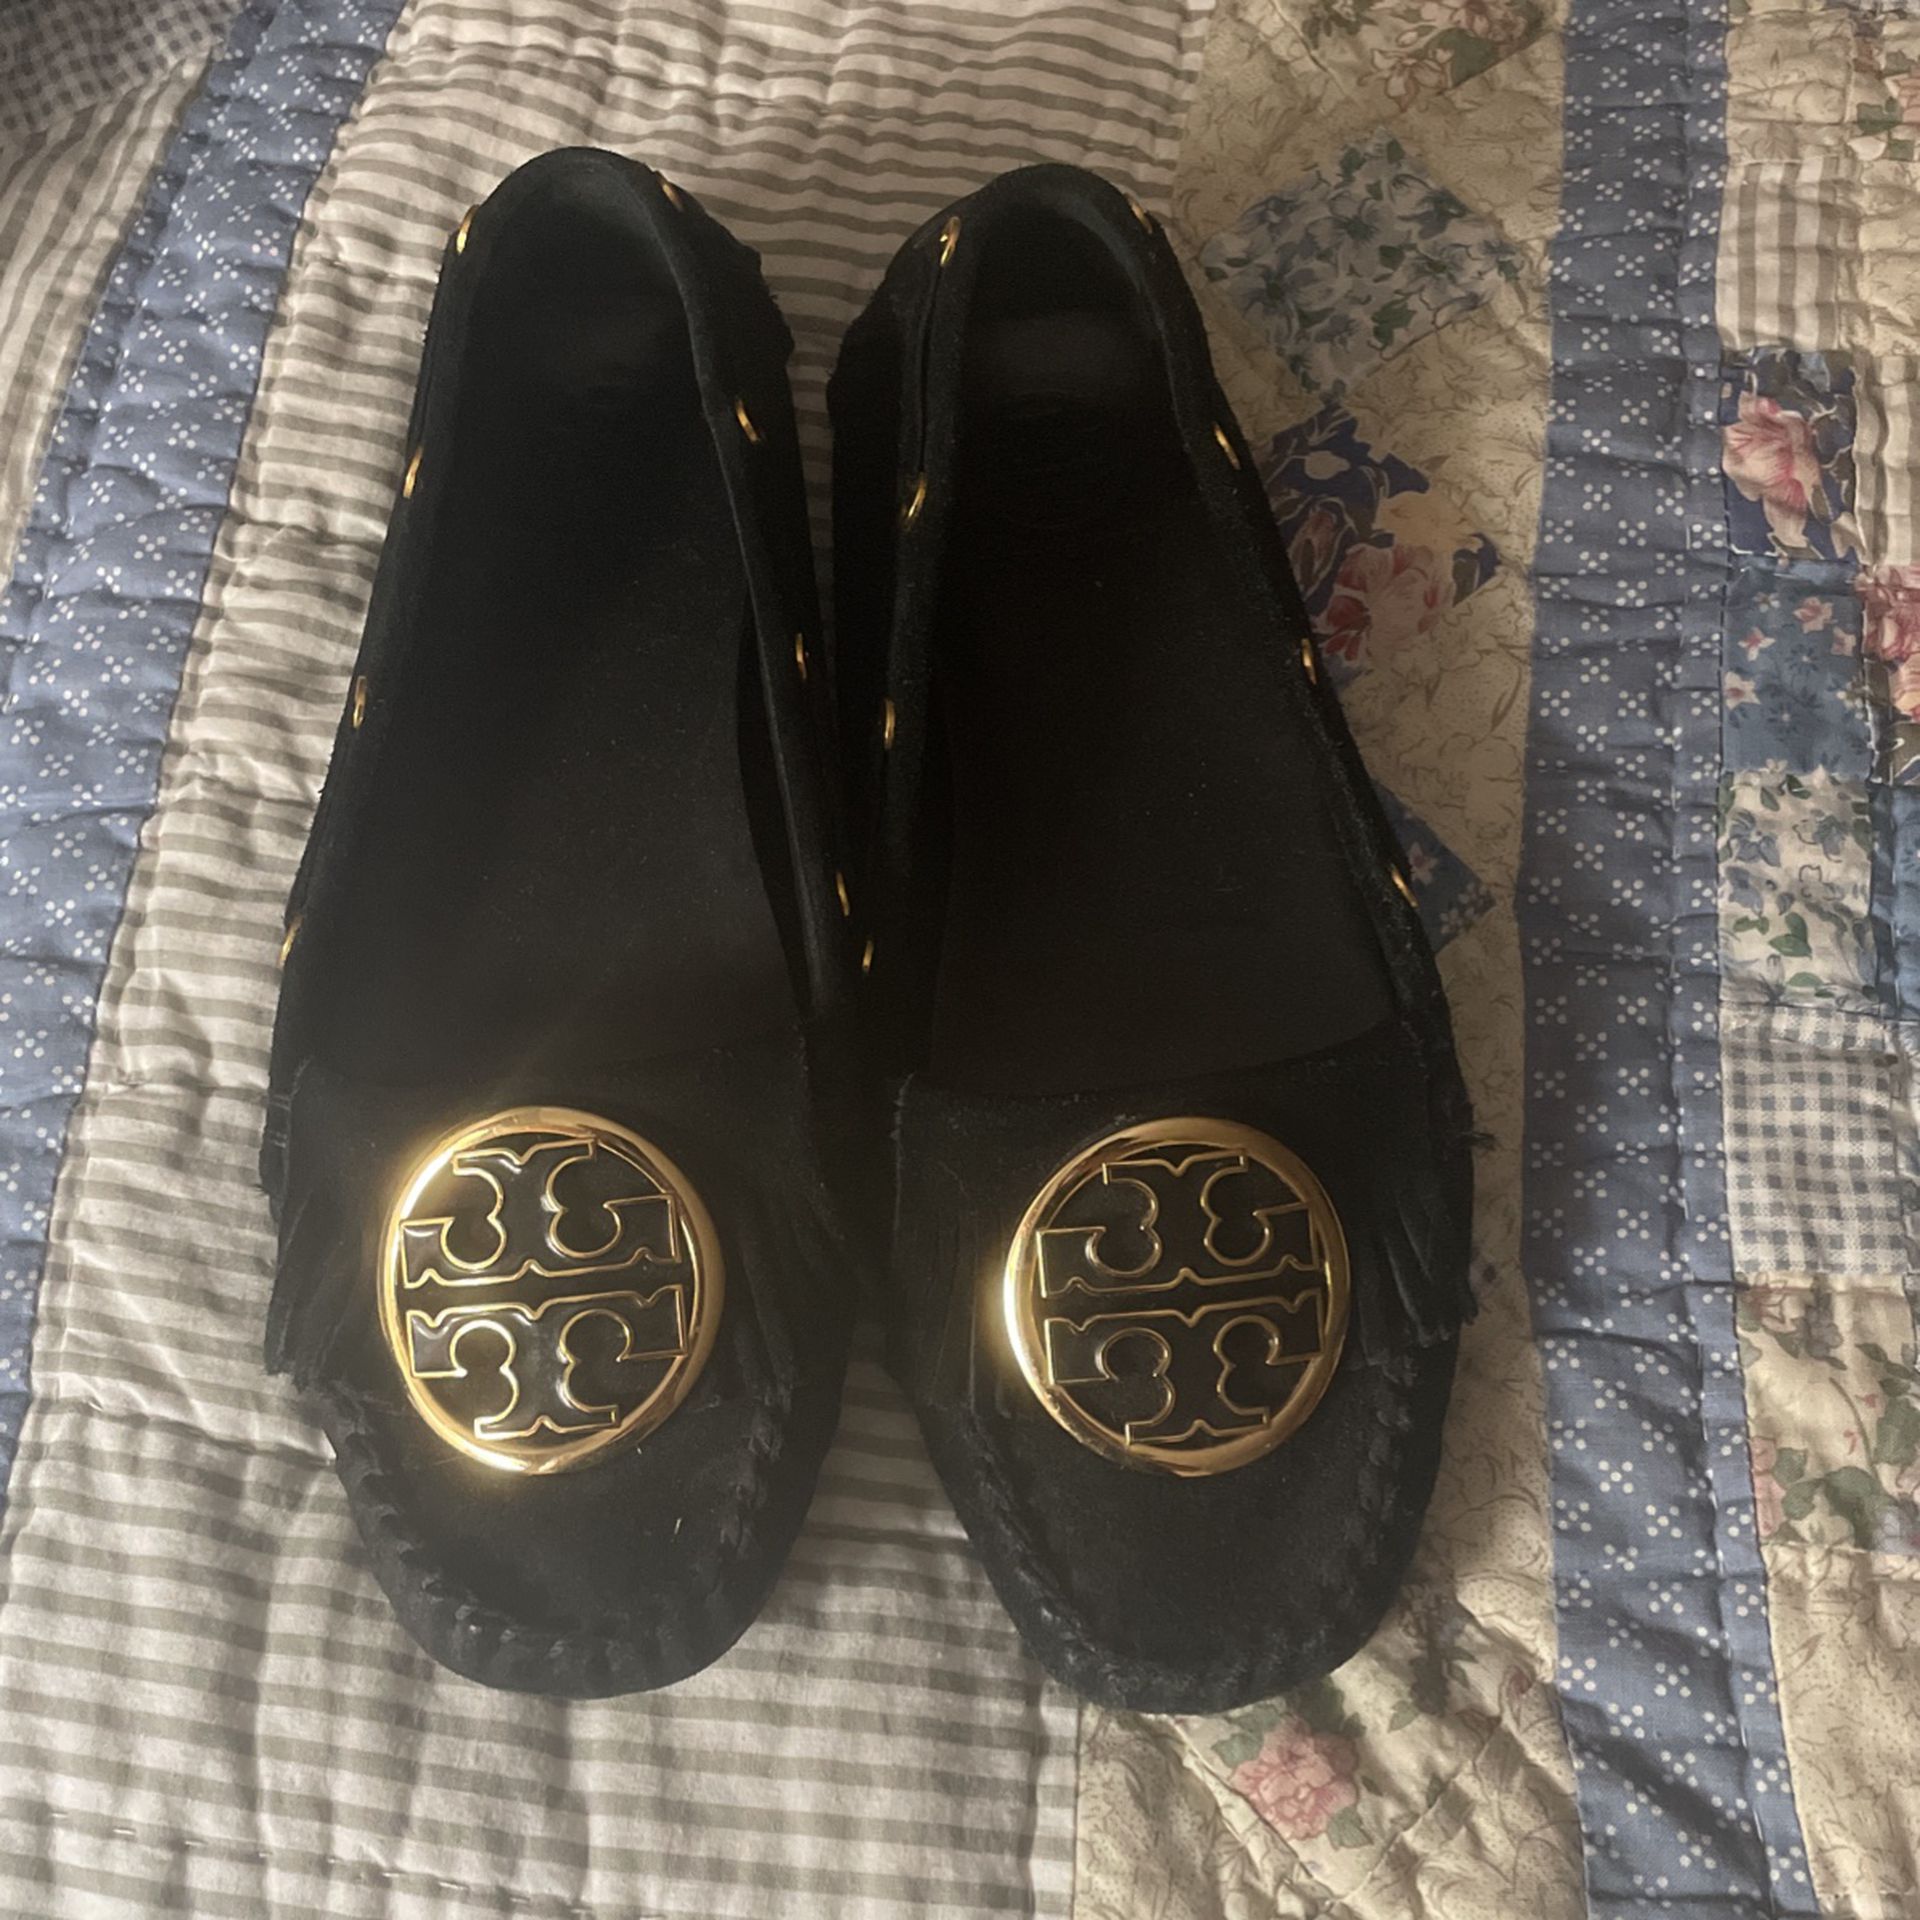 Tory Burch Black Suede Shoes